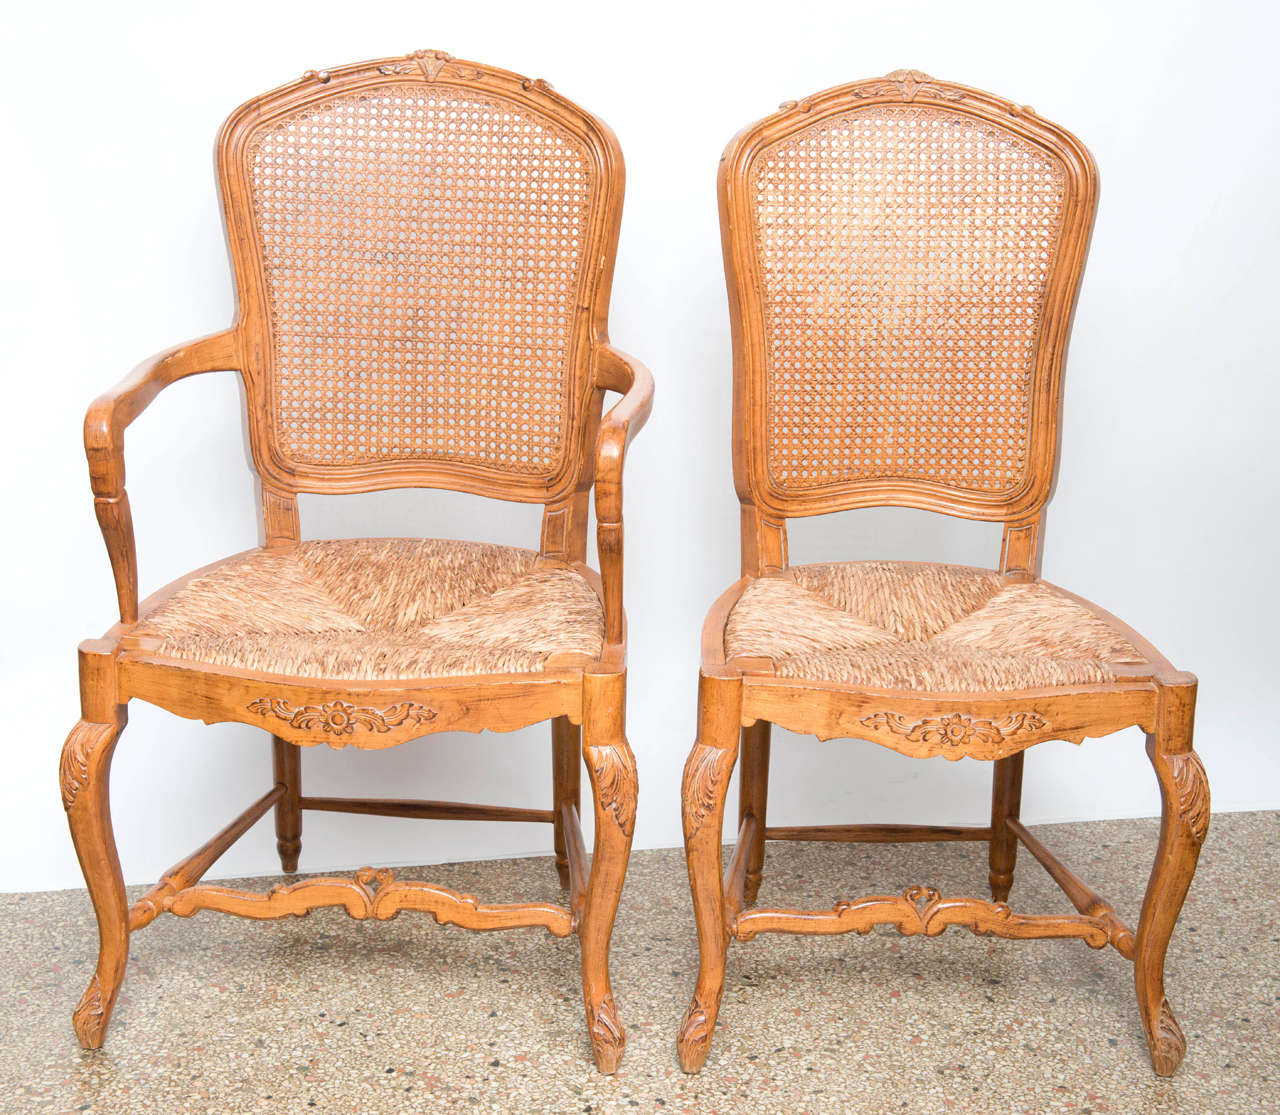 The set consists of 2 arm & 4 side chairs.  Beautifully executed with fine carving of the backs, legs & stretcher.  Rush seats & canned backs, original restored finish

Sides:  21w x 21d x 39.5h

Arms:  22.5w x 23d x 39.5

Originally $ 2,500.00